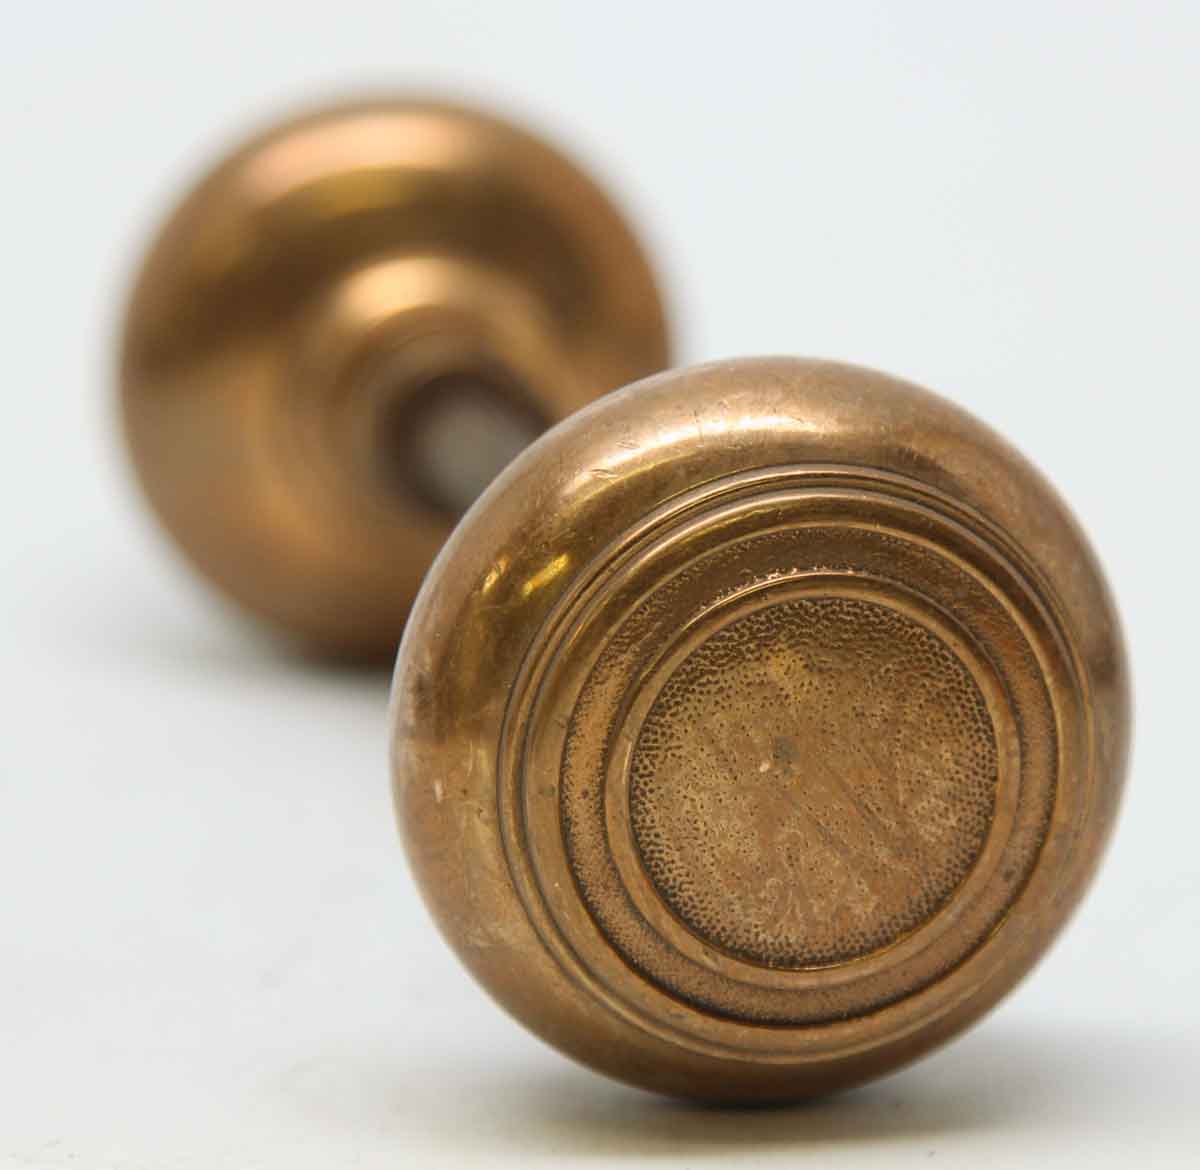 Antique Door Knobs: Identification and Values of Classic Styles